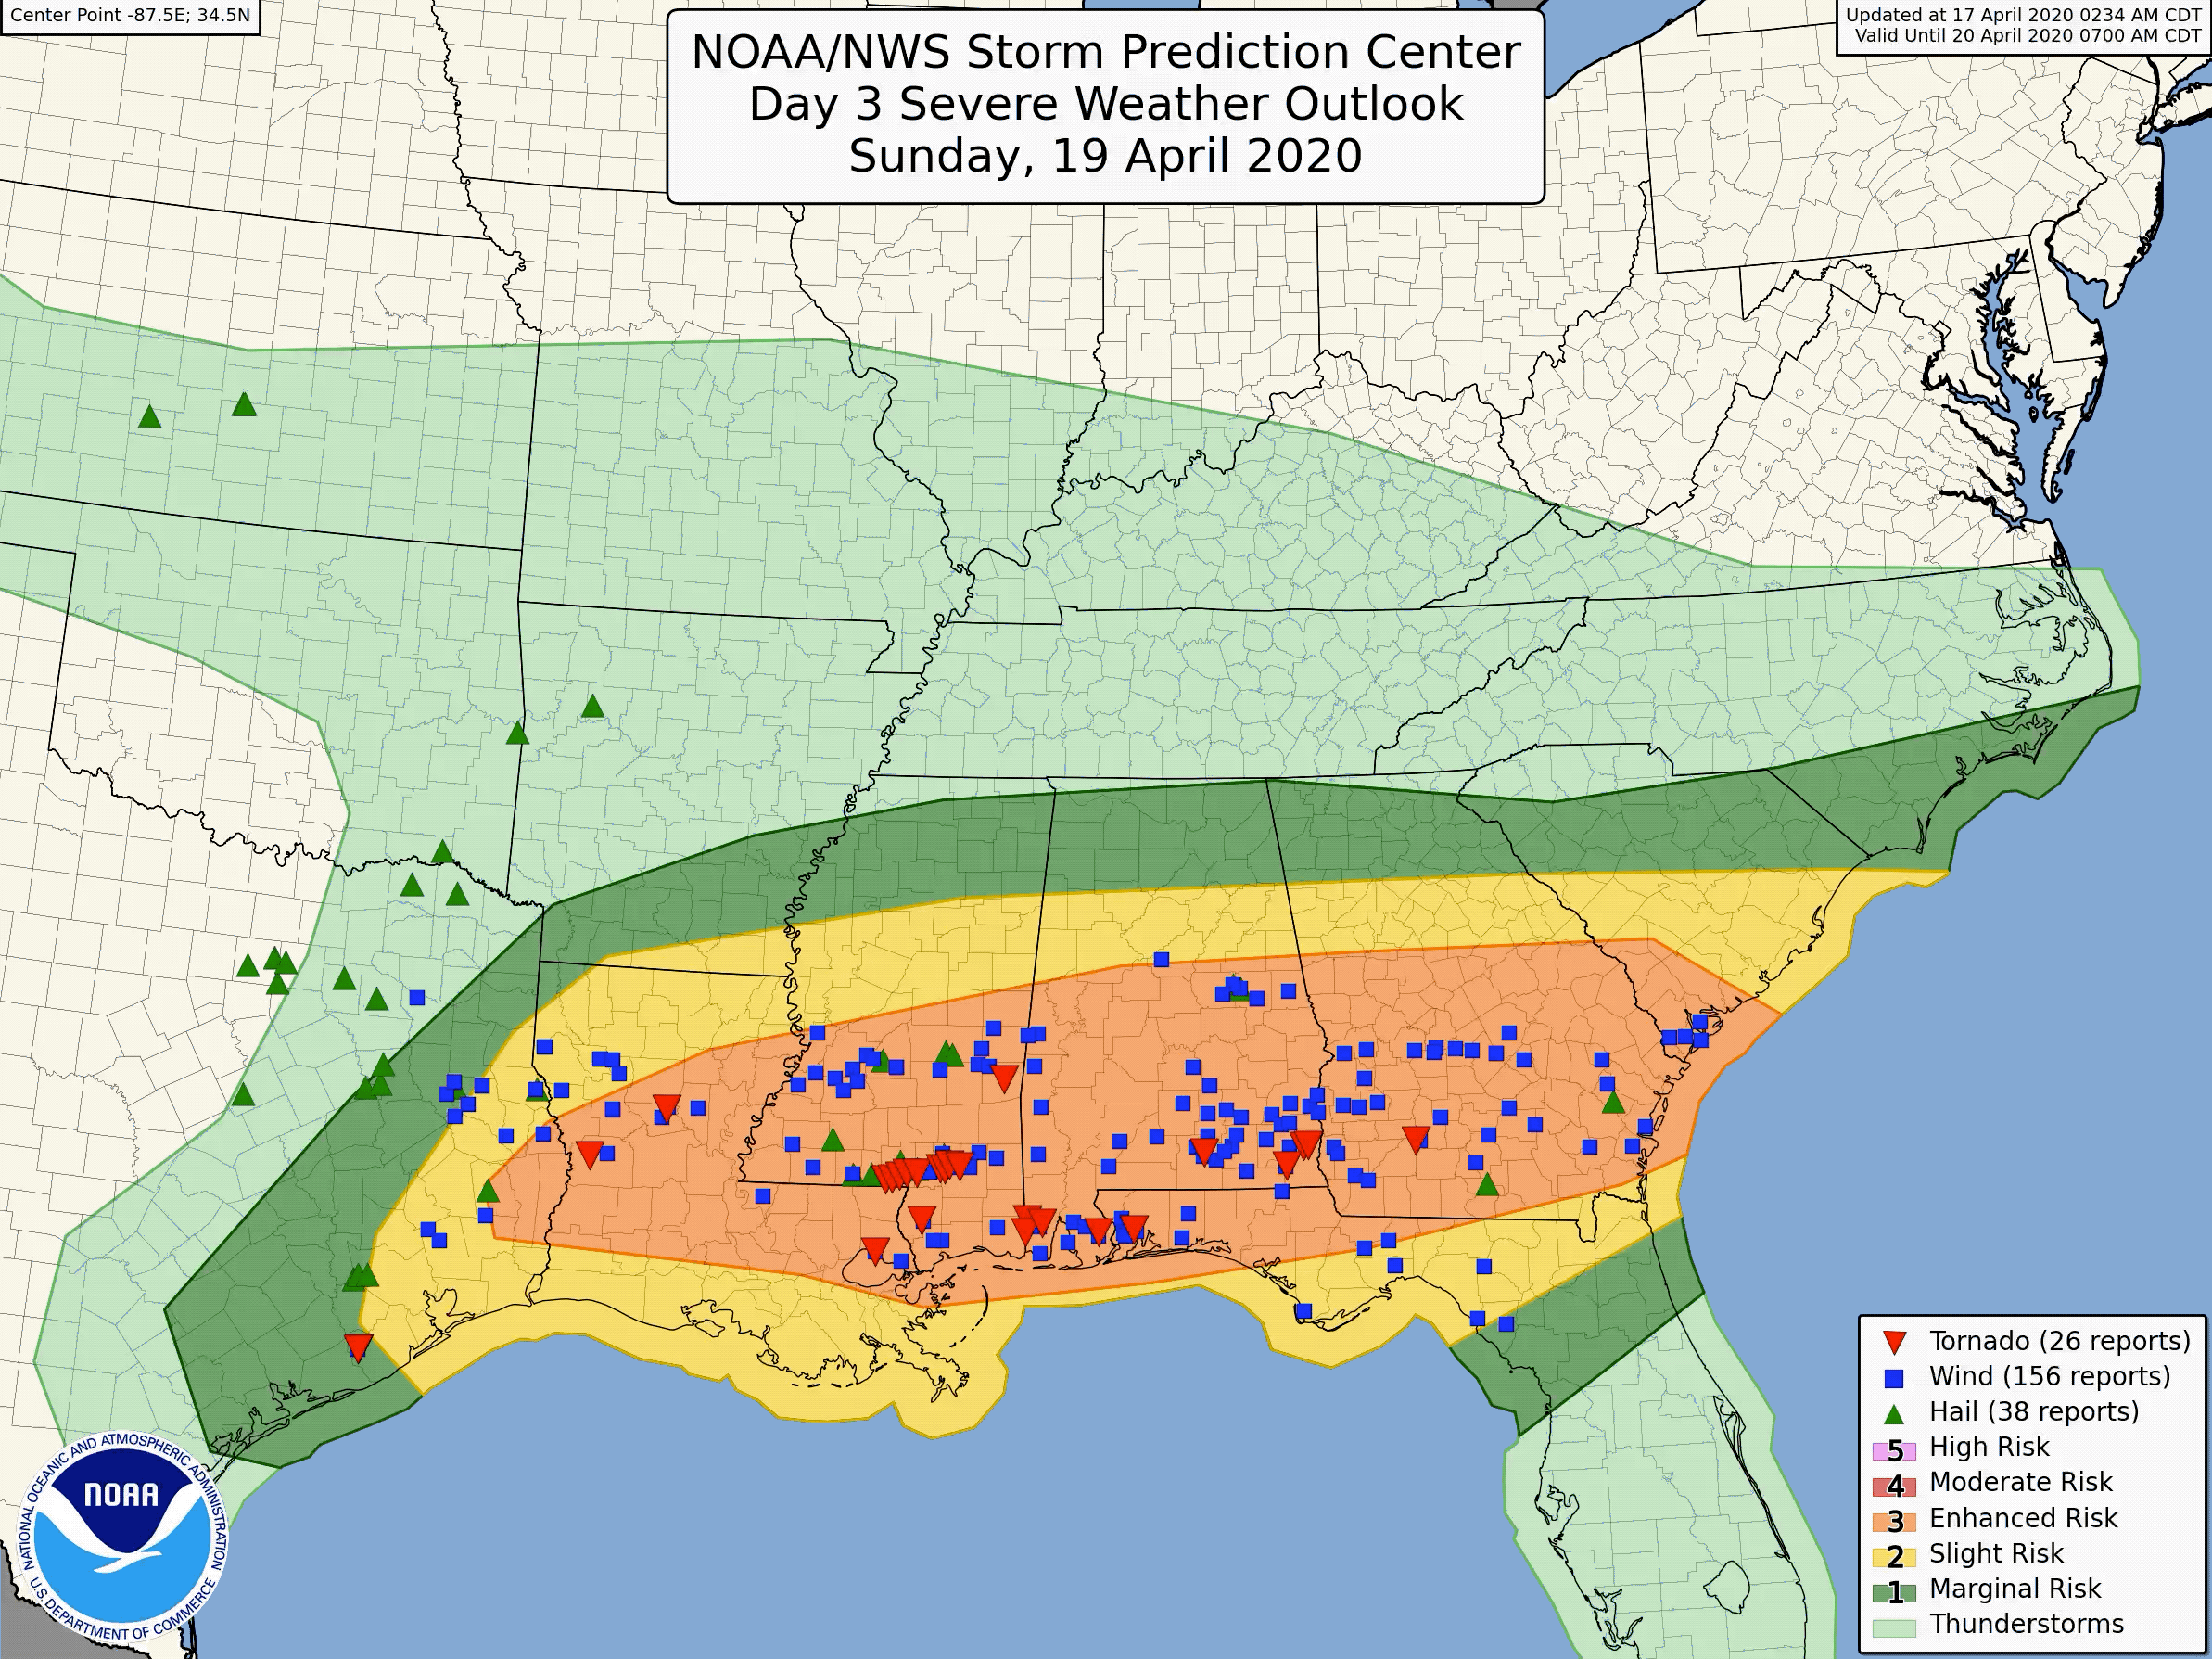 Evolution of national-scale severe weather outlooks from 3 days before up through the event with initial public reports of severe weather overlaid